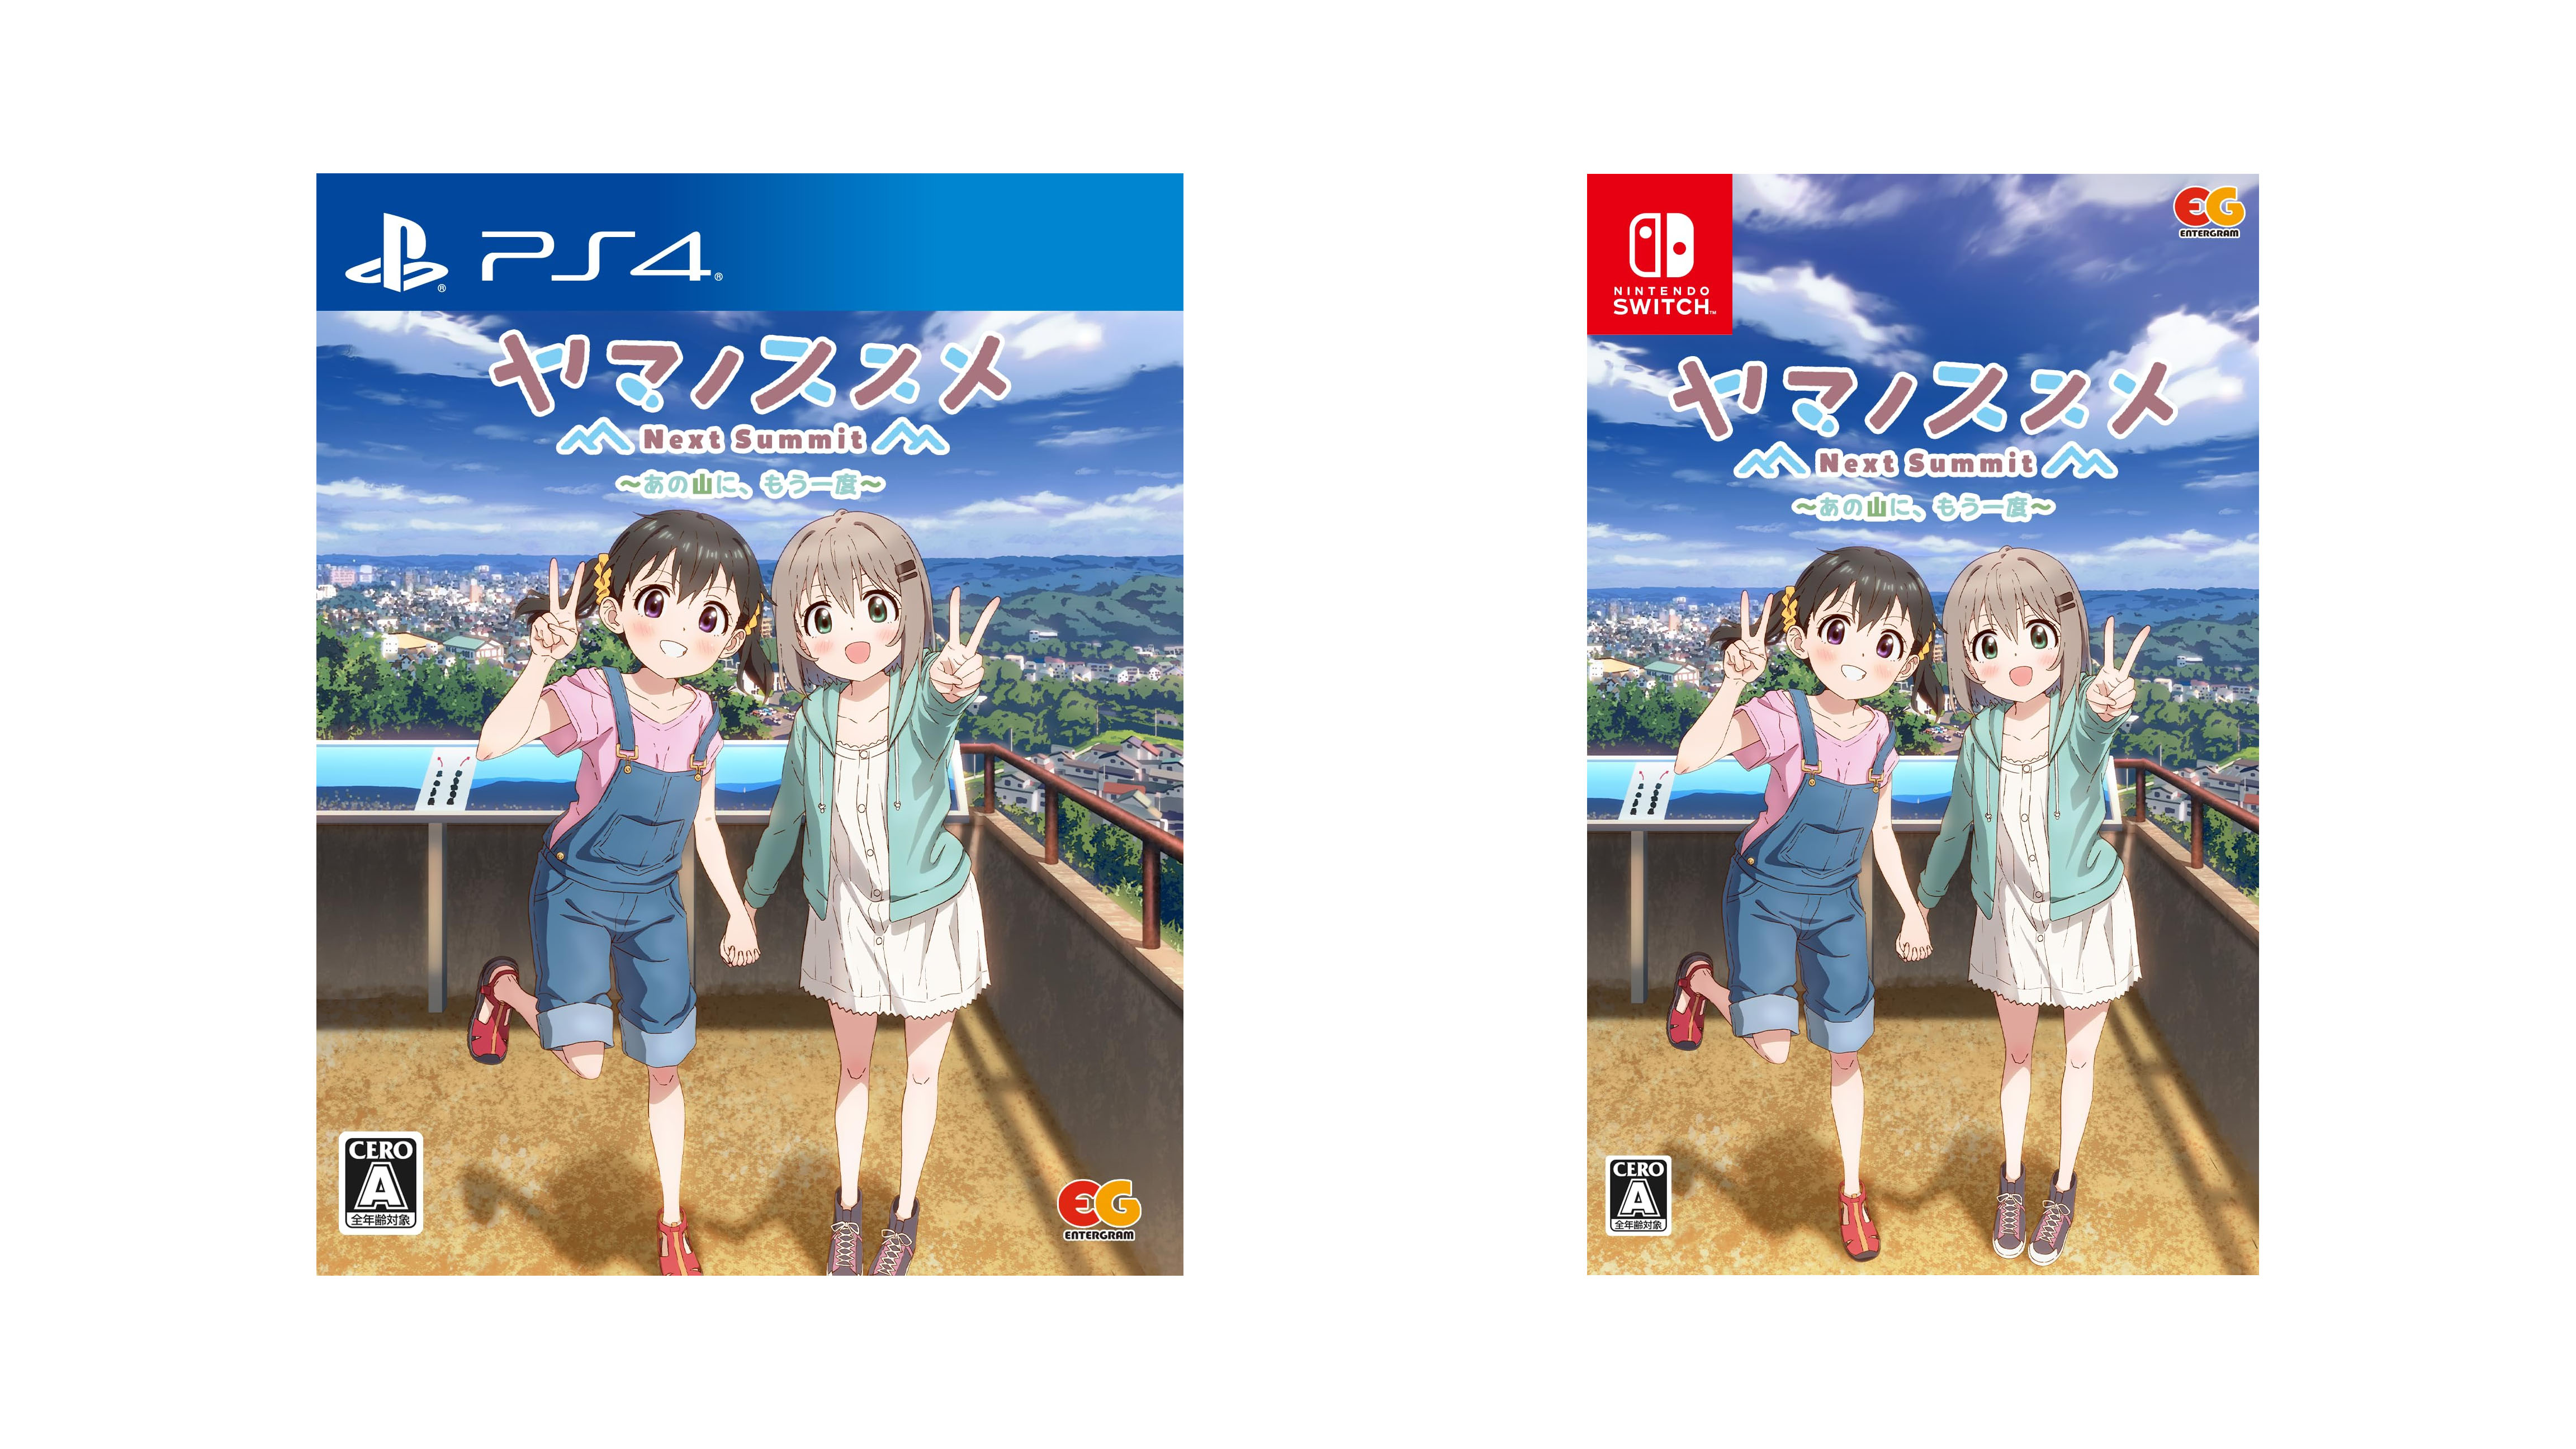 #
      Encouragement of Climb: Next Summit – Ano Yama ni, Mou Ichido announced for PS4, Switch